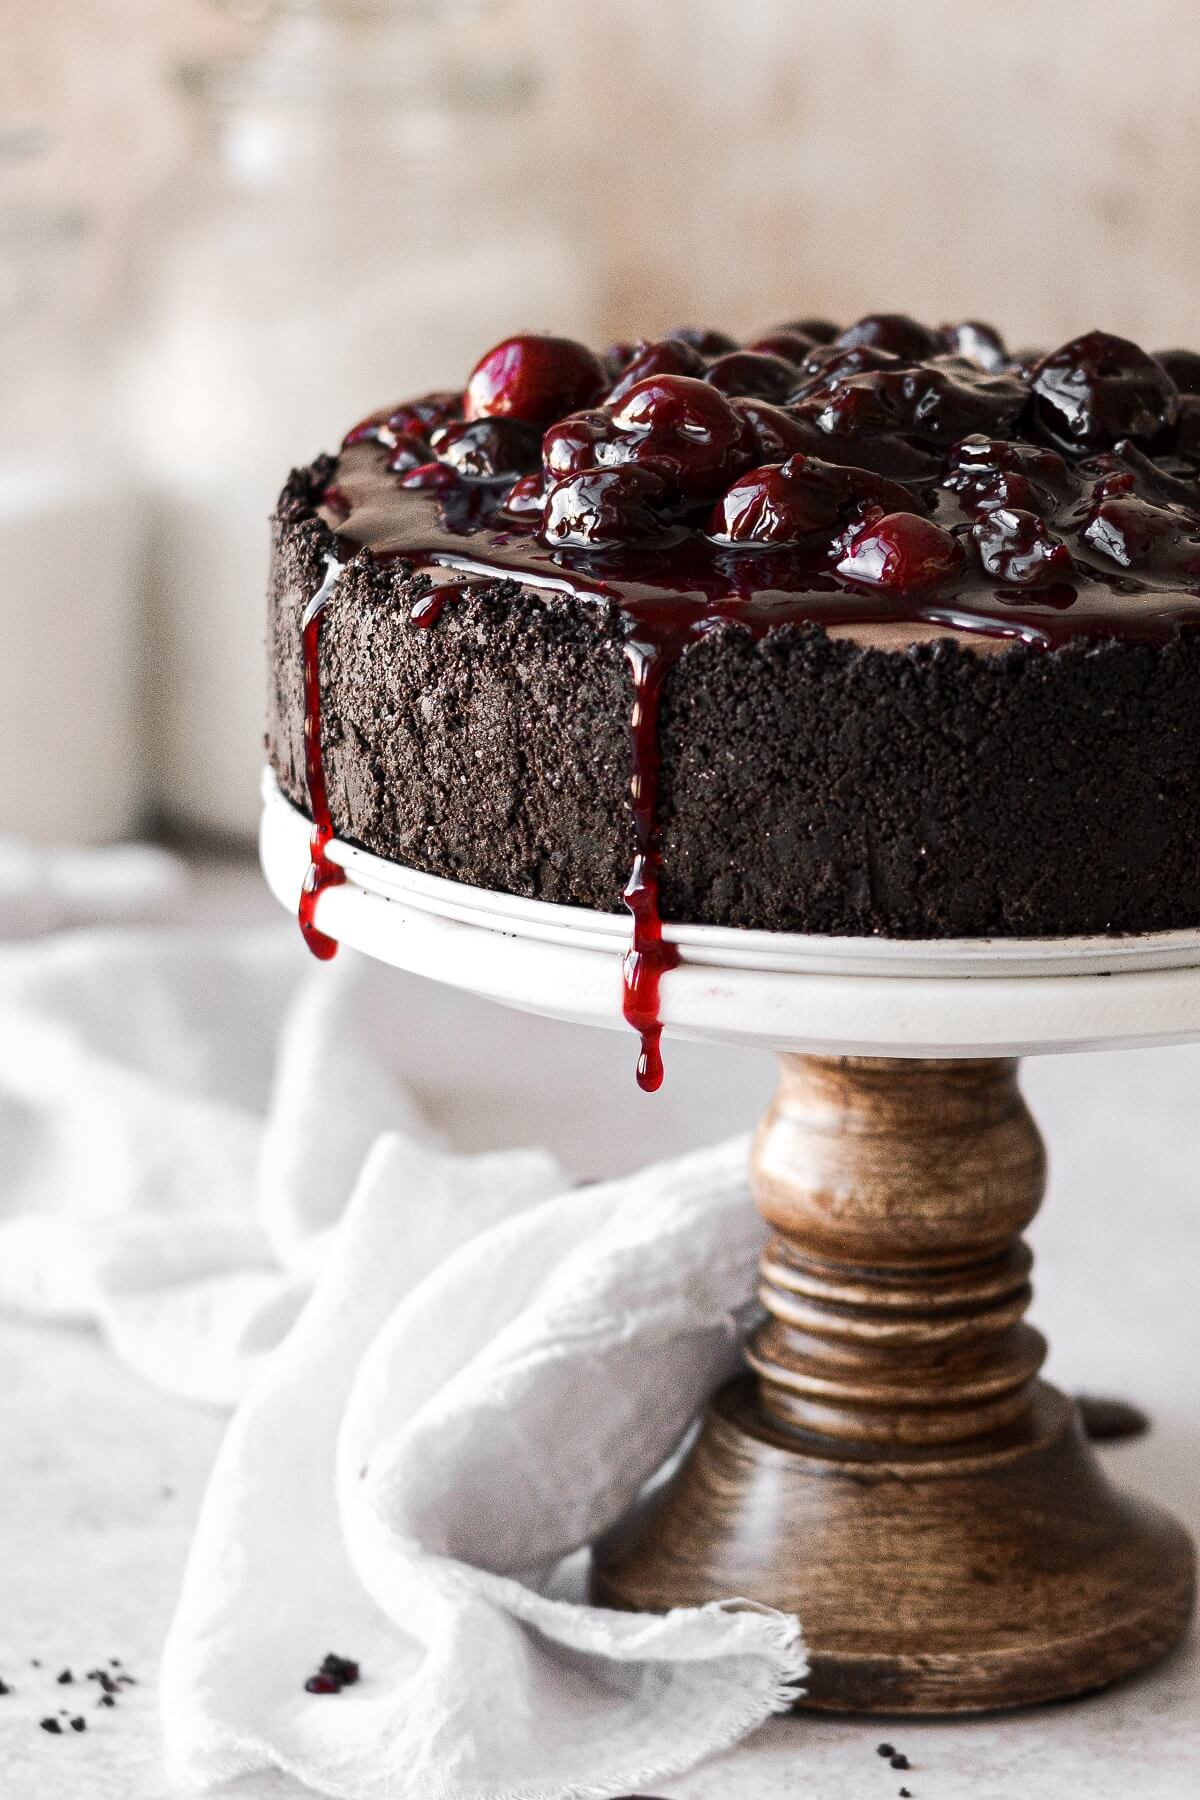 Cherry sauce dripping down the sides of a chocolate cheesecake.